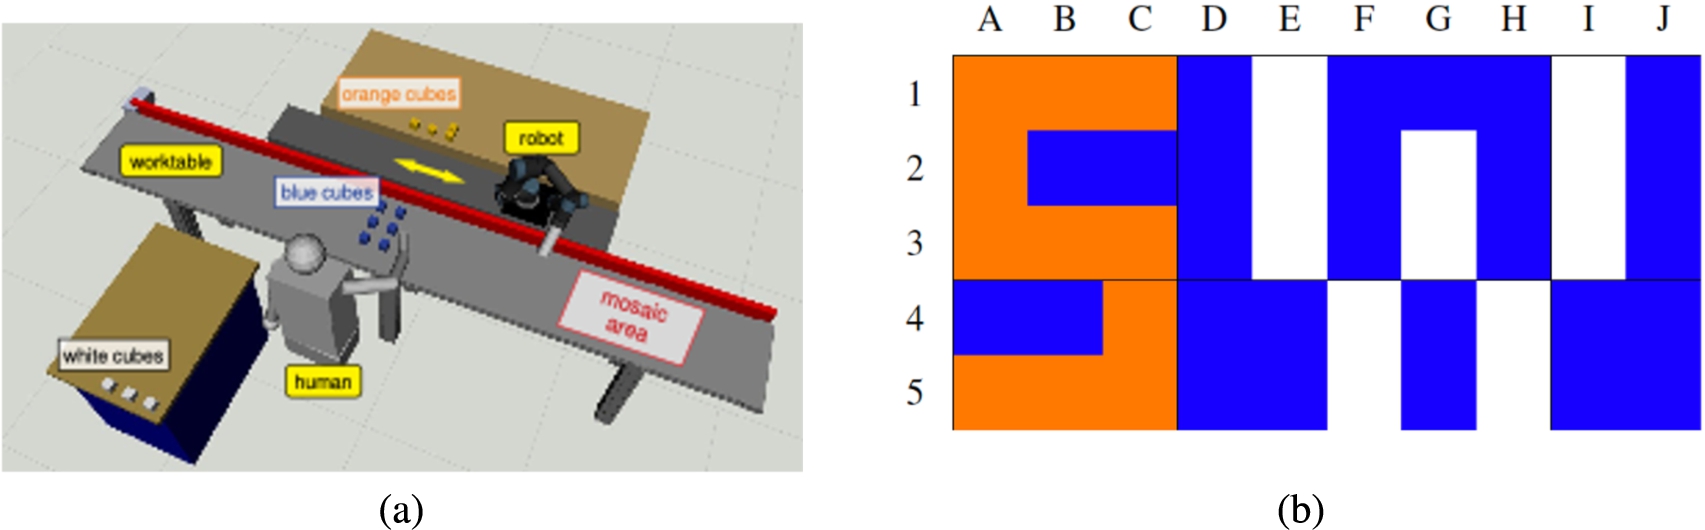 Configuration of the mosaic use case: (a) structure of the ROS-based simulation of the collaborative cell; (b) layout of the mosaic collaboratively assembled by the human and the robot.